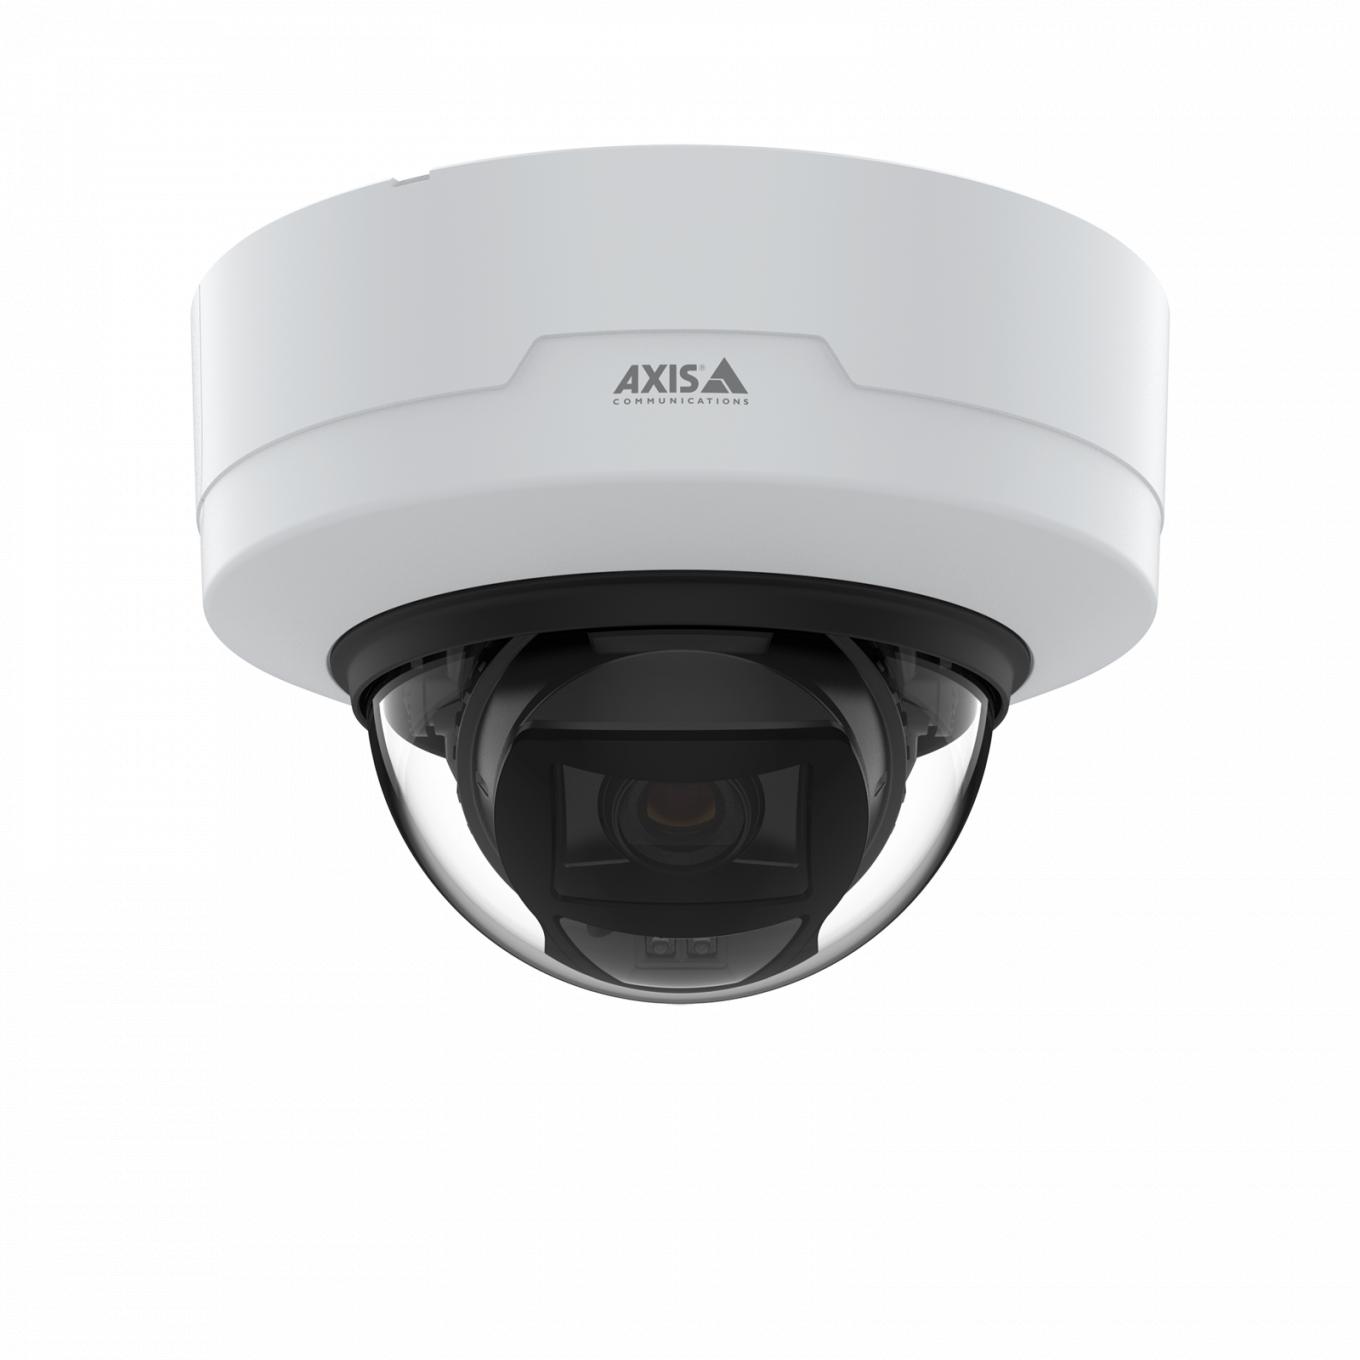 AXIS P3265-LV Dome Camera mounted in ceiling from front